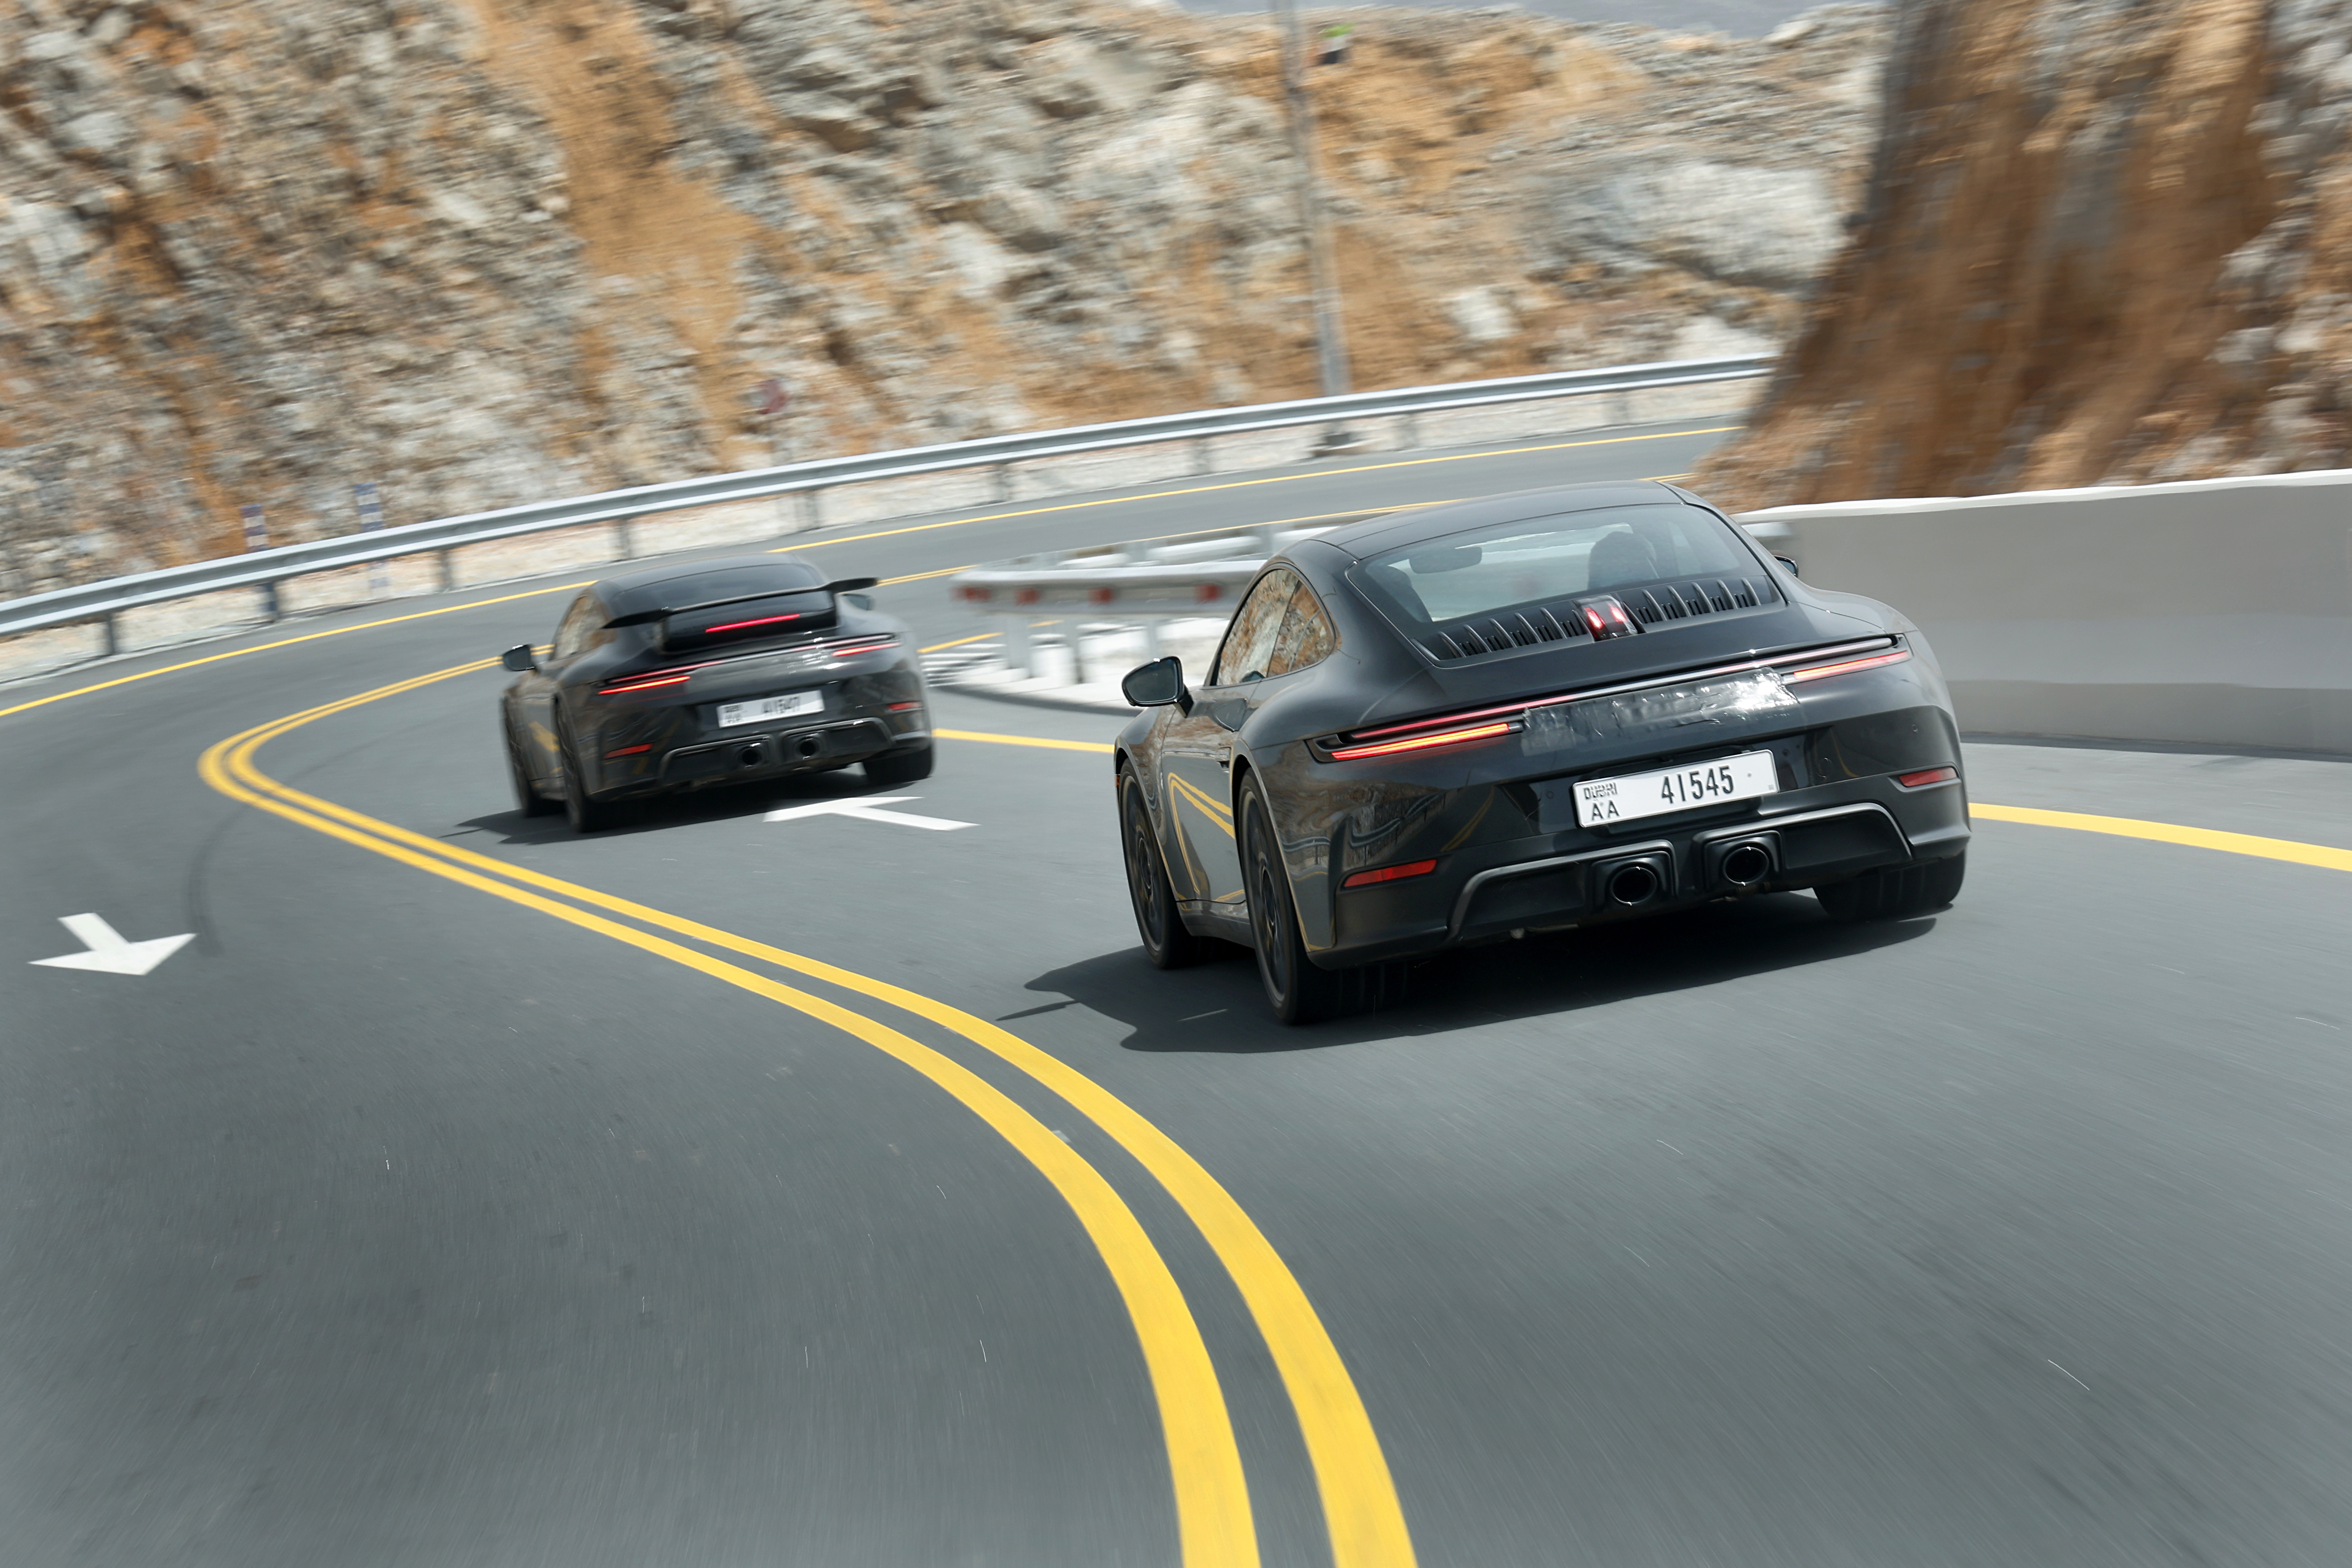 Development of 911 variant with hybrid powertrain complete